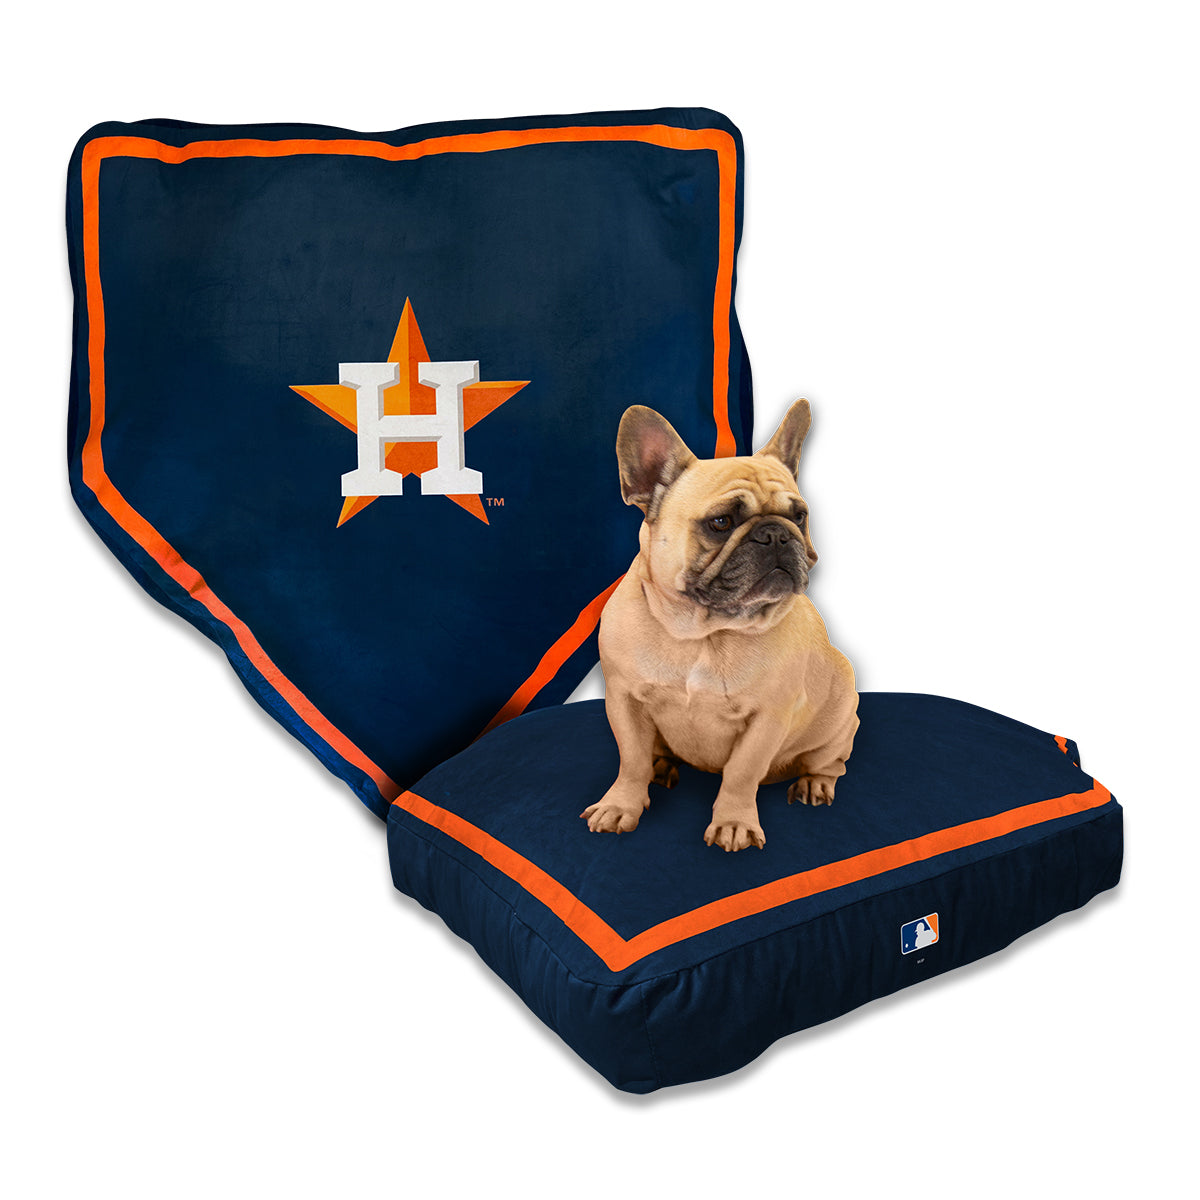 MLB PET Bed - Houston Astros Soft & Cozy Plush Pillow Bed. - Baseball Dog  Bed. Cuddle, Warm Sports Mattress Bed for Cats & Dogs